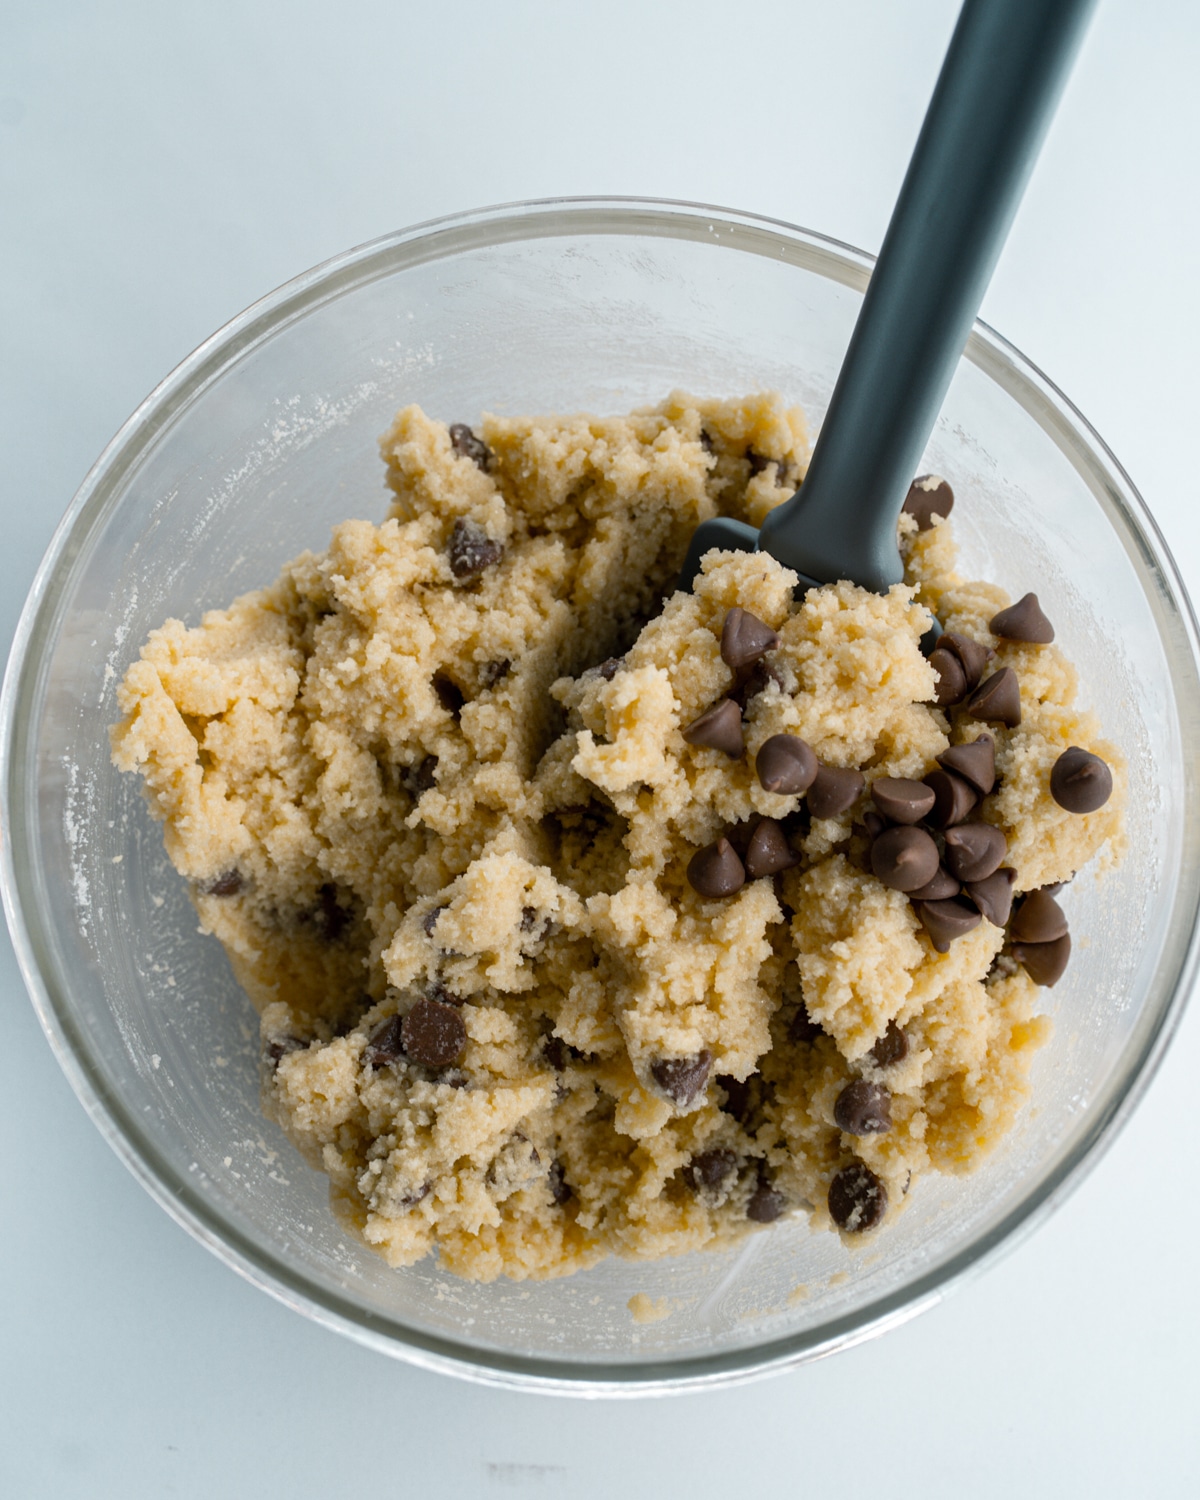 Picture of glass bowl with dough and chocolate chips mixed together and a grey spatula inside.  